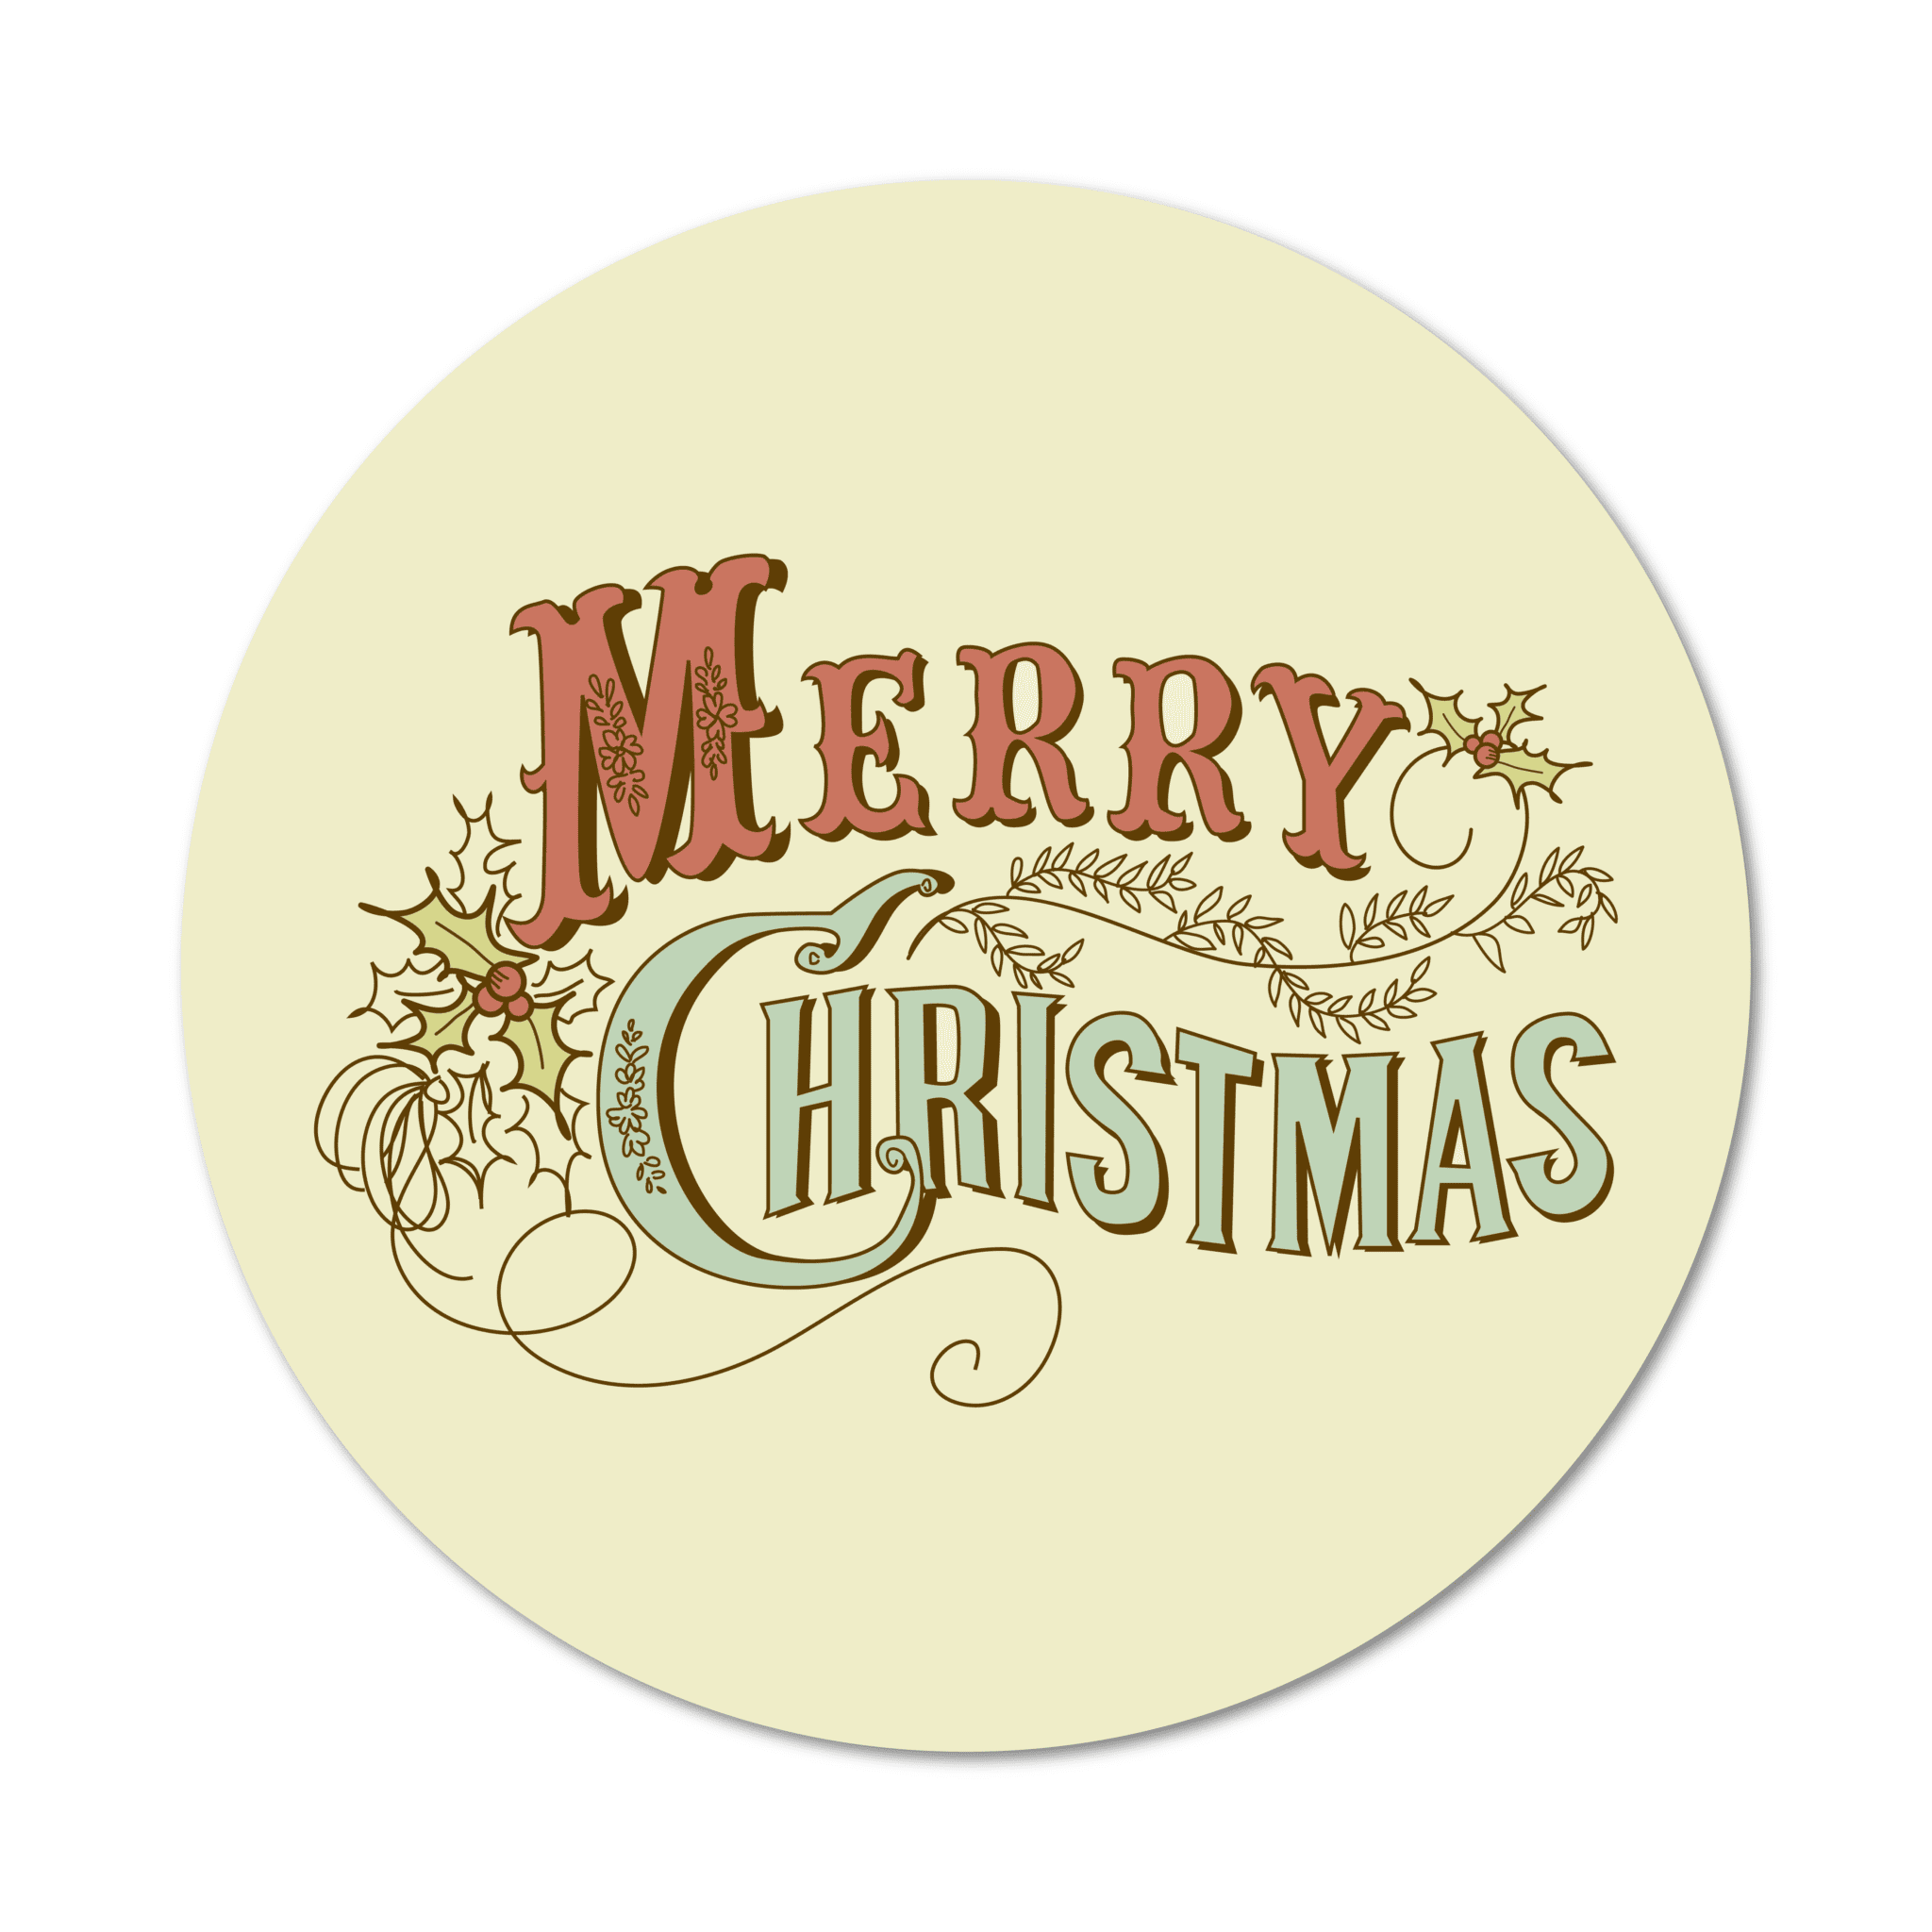 Vintage Merry Christmas Wall Print - The Signmaker